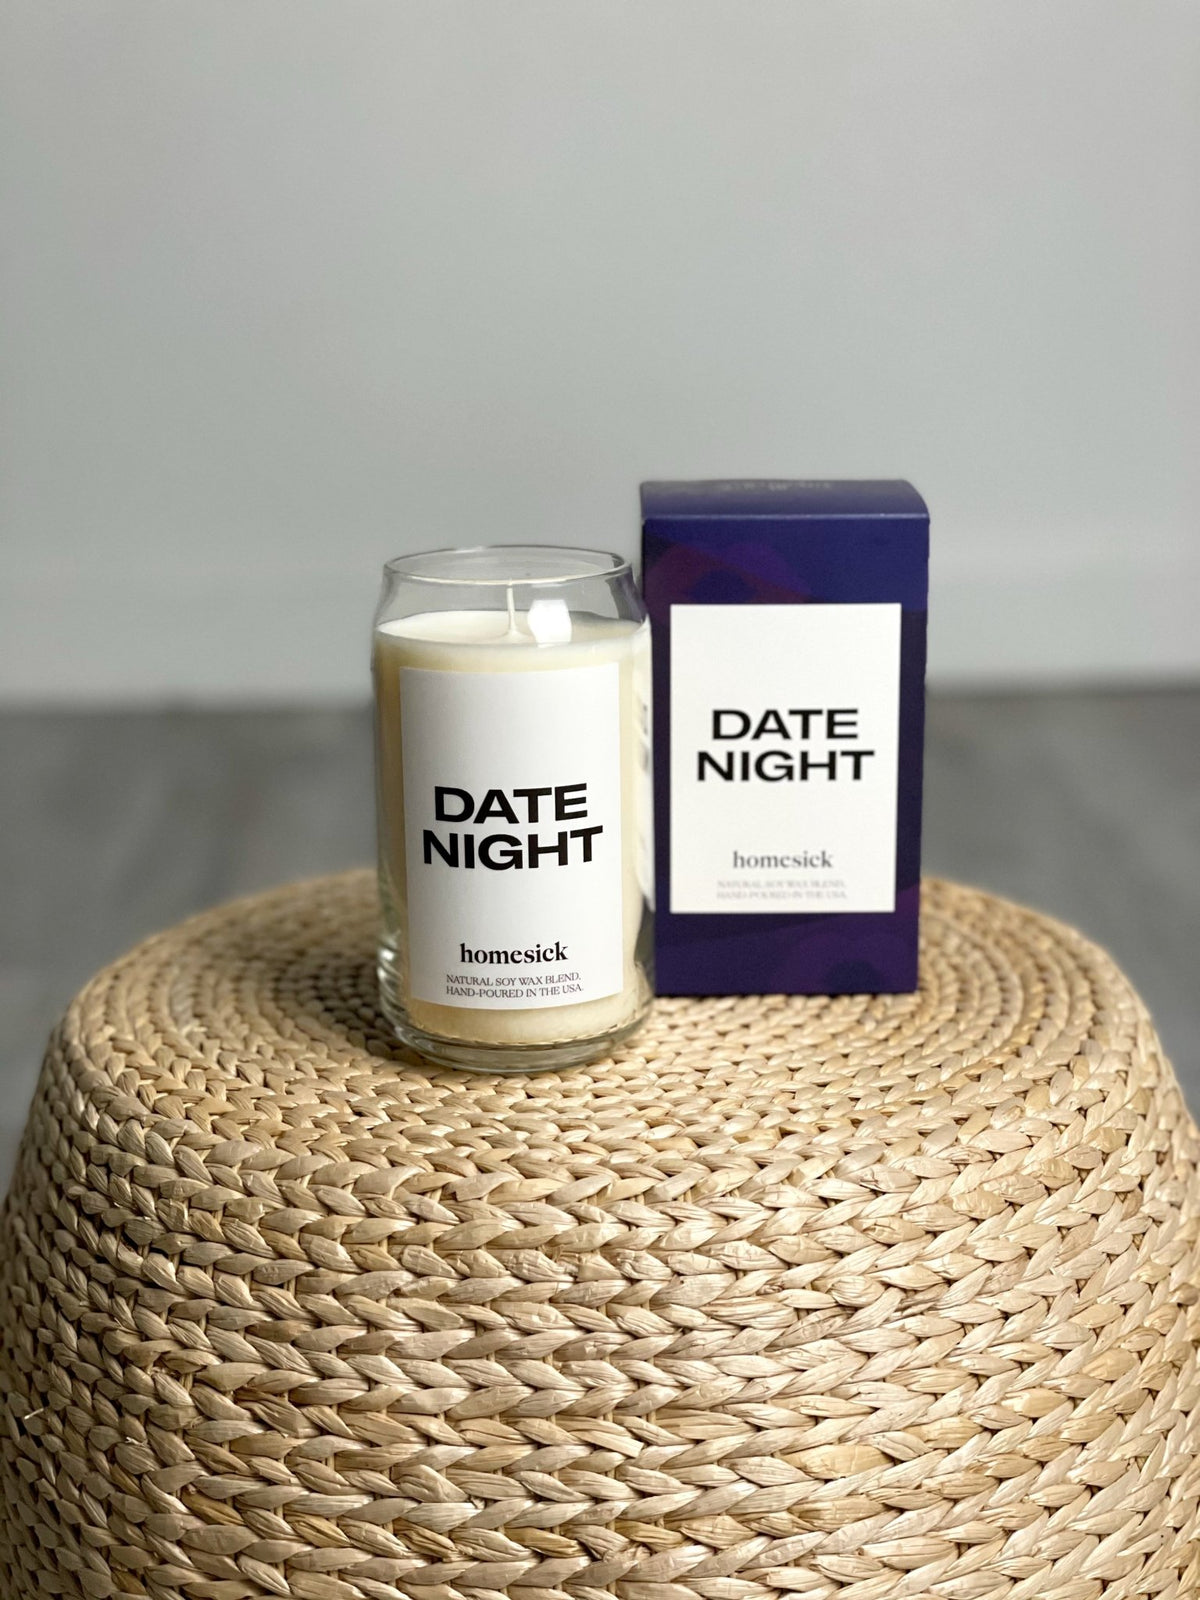 Homesick Date Night candle - Trendy Candles at Lush Fashion Lounge Boutique in Oklahoma City